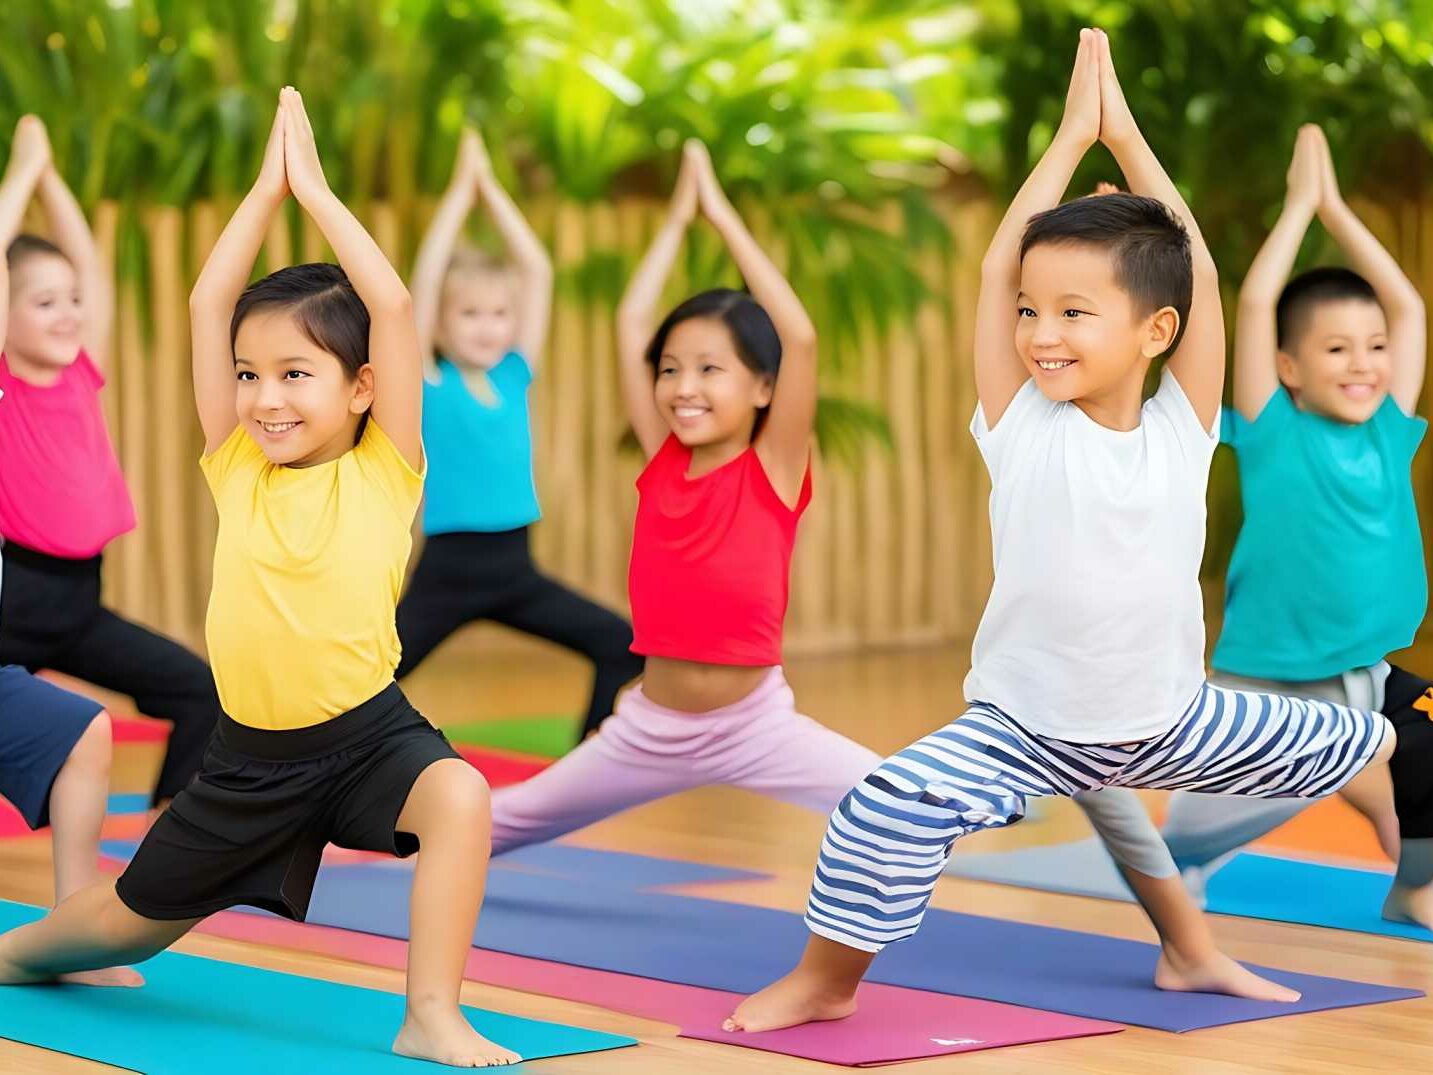 Group of kids balancing with yoga poses during martial arts training